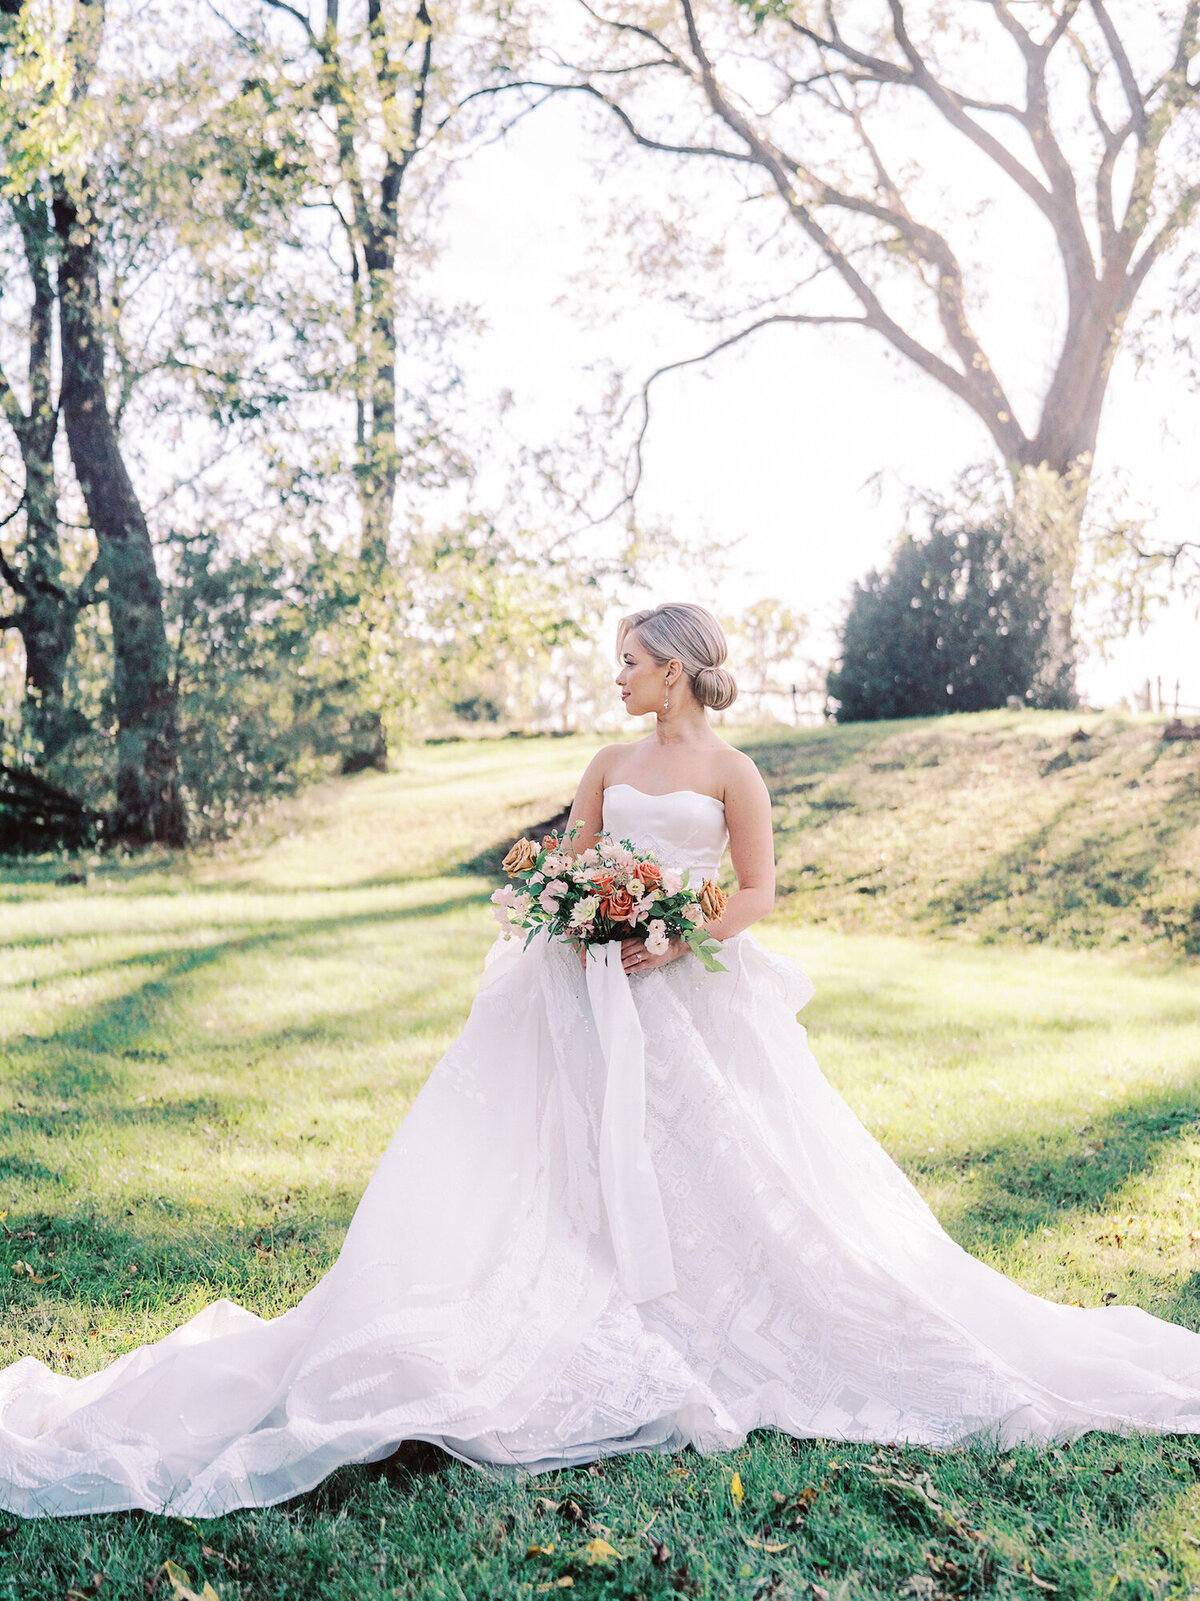 Jenny-Haas-Photography-Luxury-DC-Planner-Prof-Jimmy-Choo-Wedding-Gown-Golden-Sunset-Photos